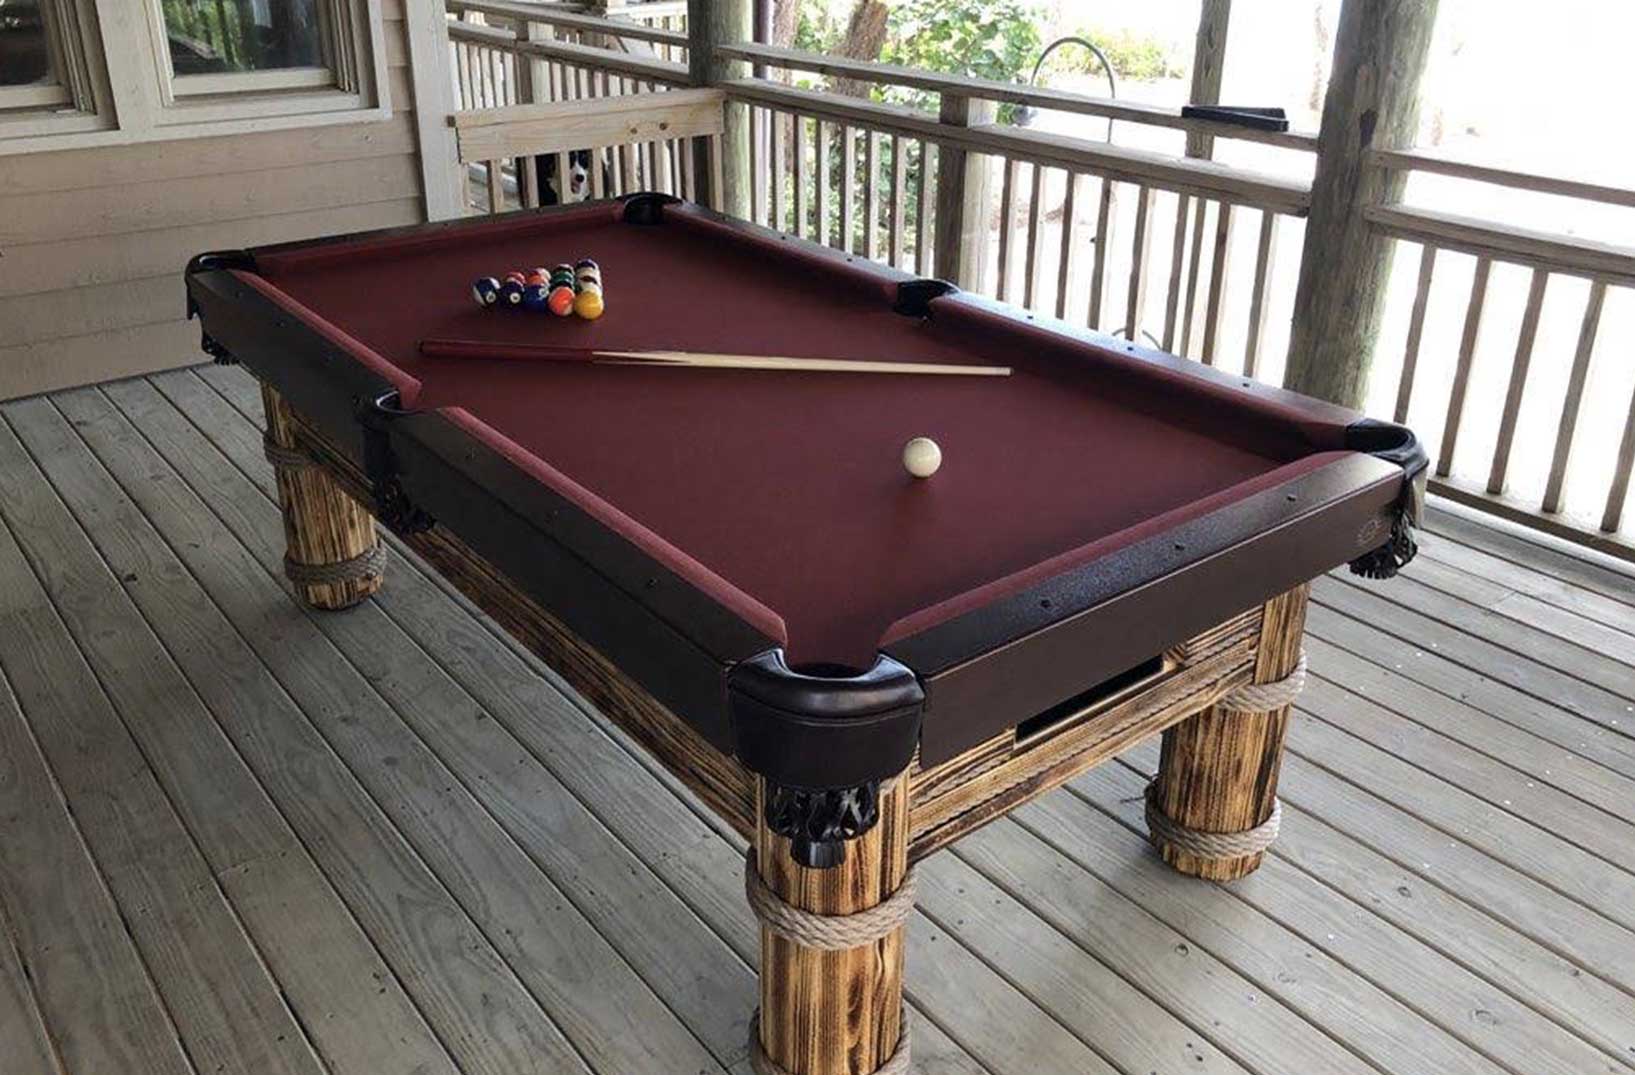 R&R Outdoors' Caribbean Outdoor Pool Table in Natural Finish - All Weather Billiards and Games